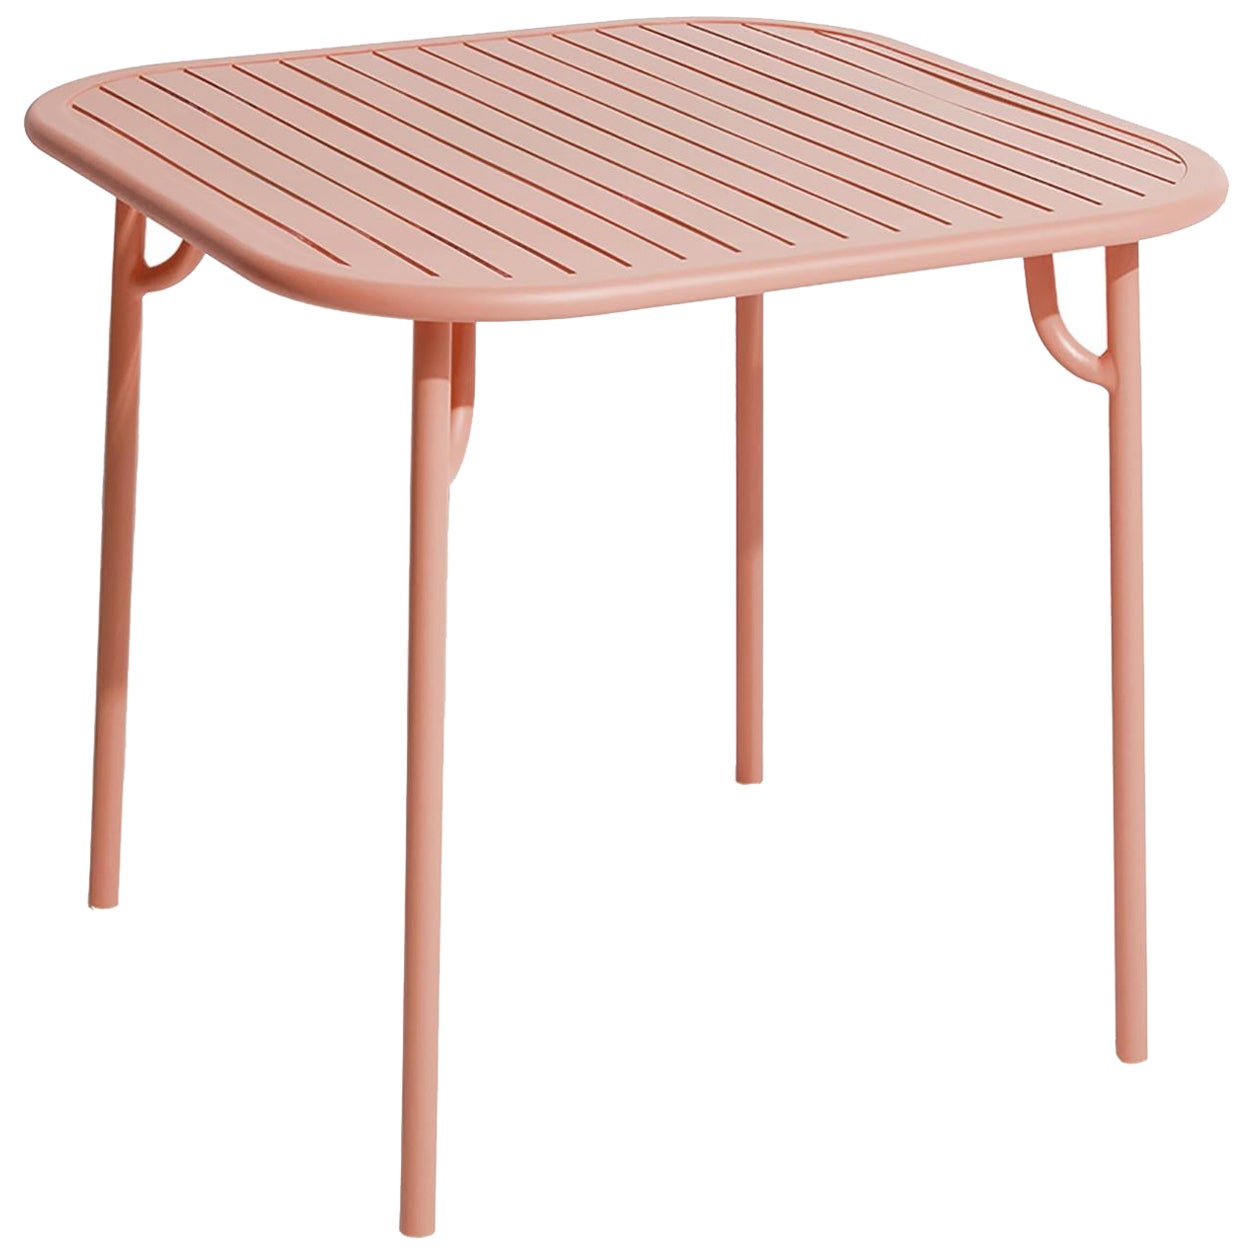 Petite Friture Week-End Square Dining Table in Blush Aluminium with Slats For Sale